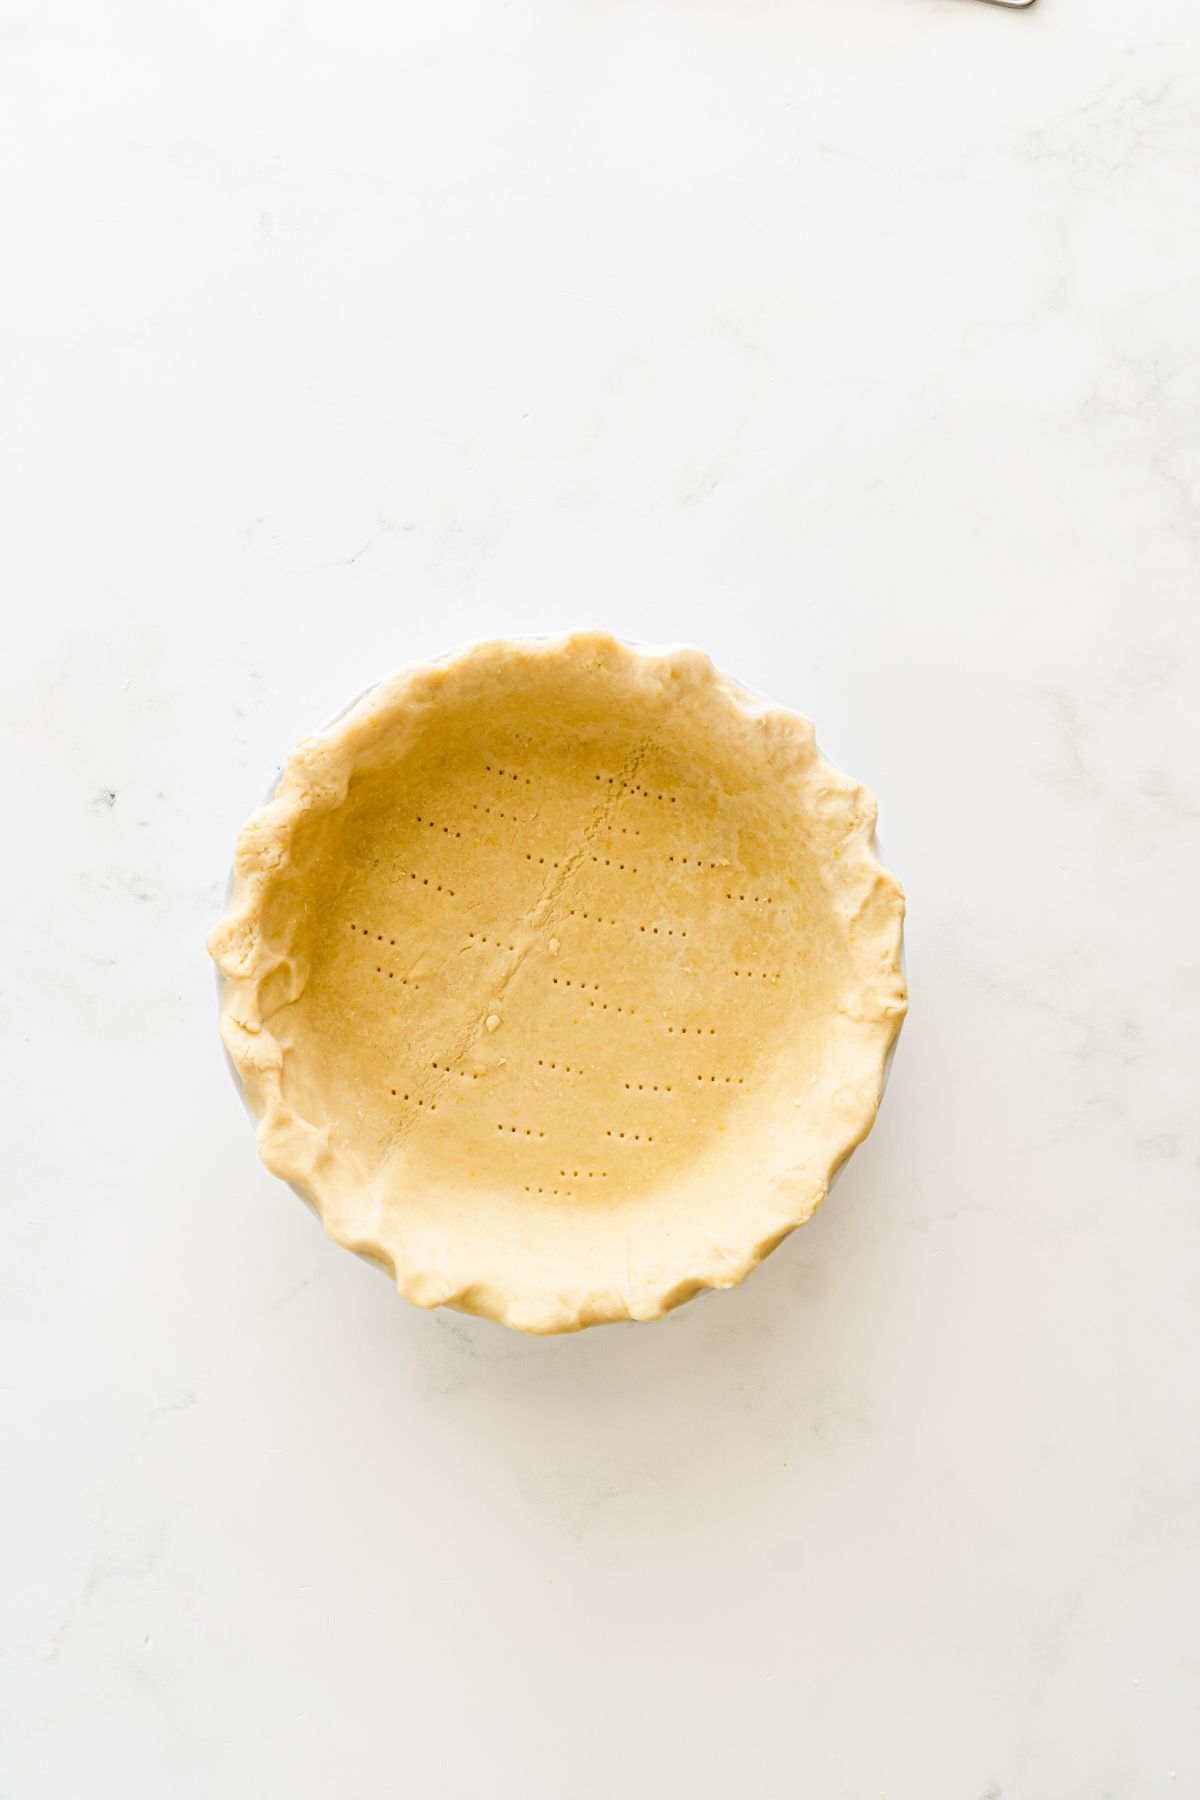 Pie crust pricked by a fork